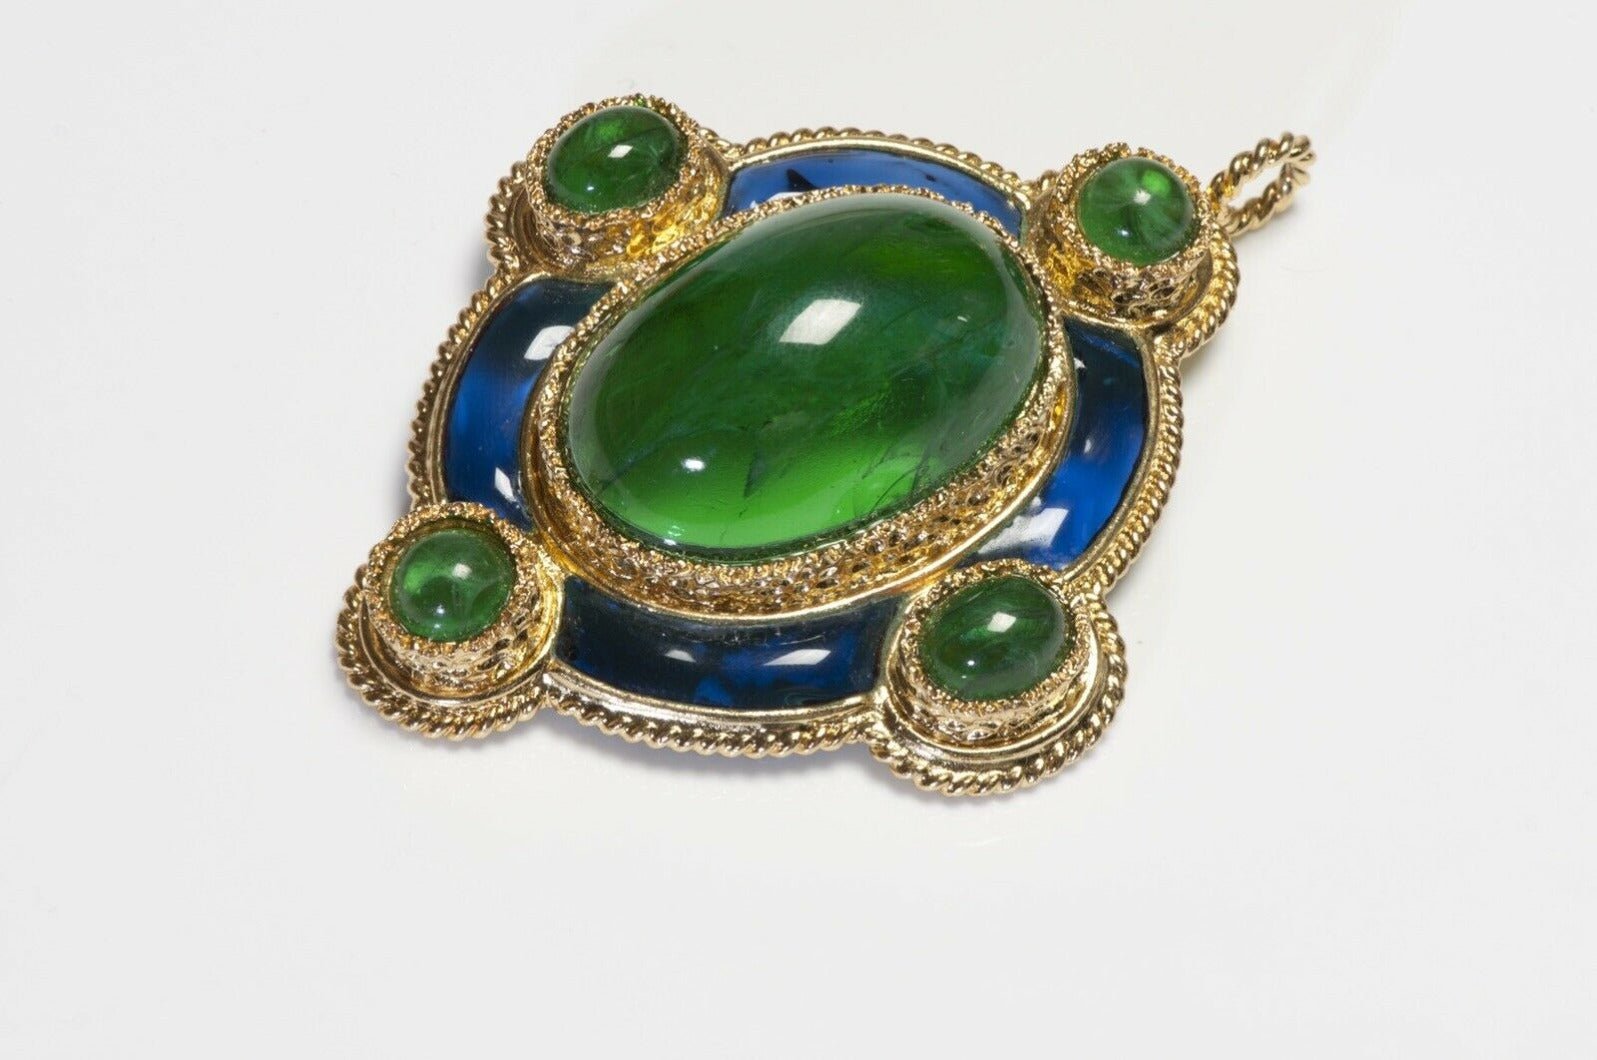 Christian Dior 1971 Henkel & Grosse Green Blue Poured Glass Pendant - DSF Antique Jewelry